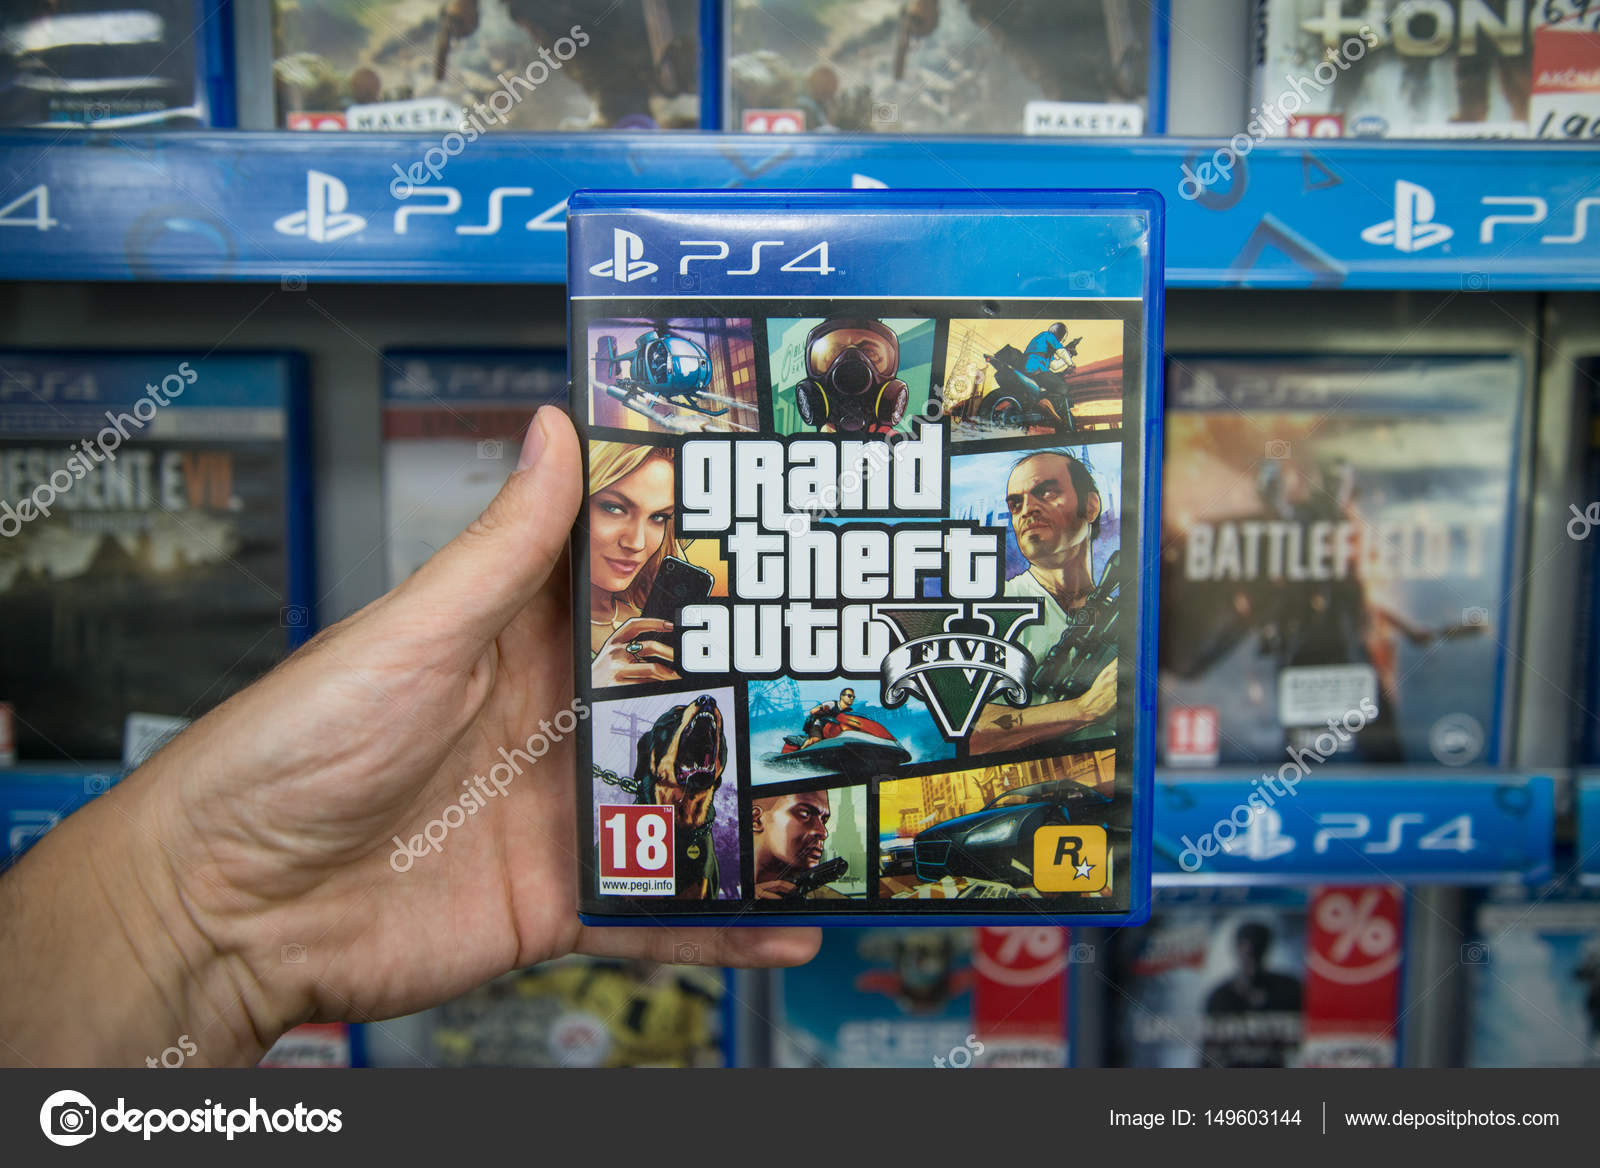 Grand Theft Auto 5 videogame on Sony Stock Editorial Photo © Pe3check #149603144